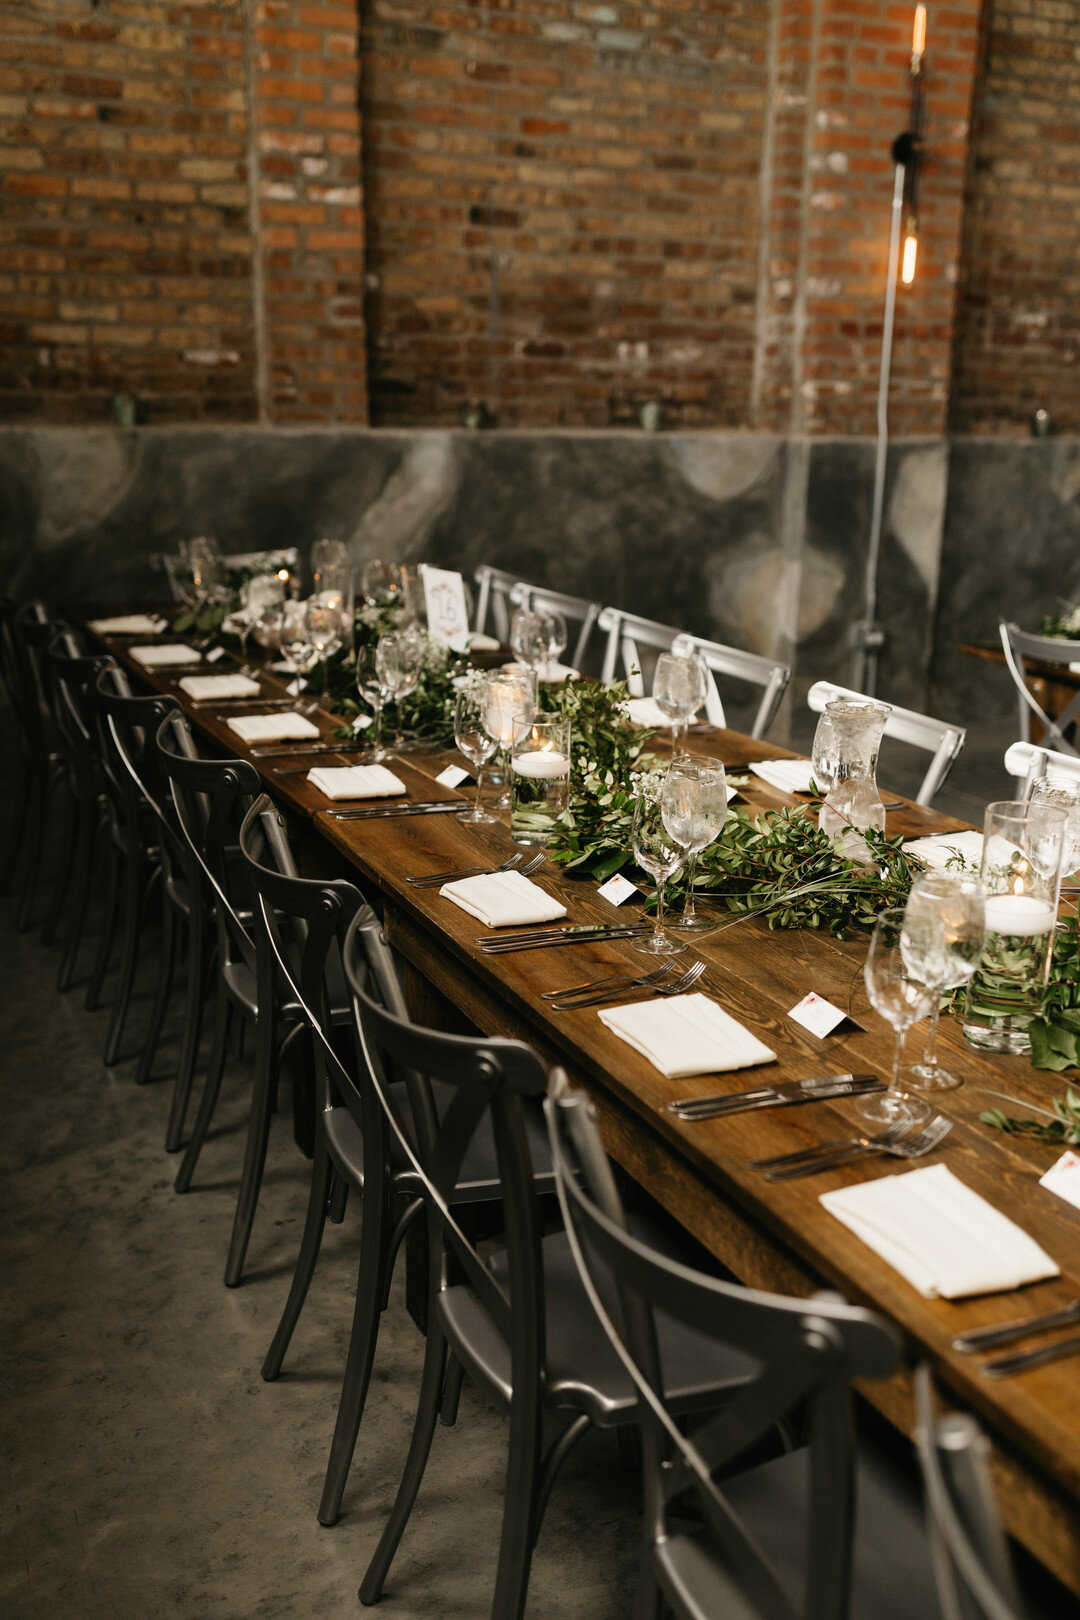 Fairlie Industrial Chicago Wedding captured by We Are The Bowsers. See more wedding inspiration at CHItheeWED.com!